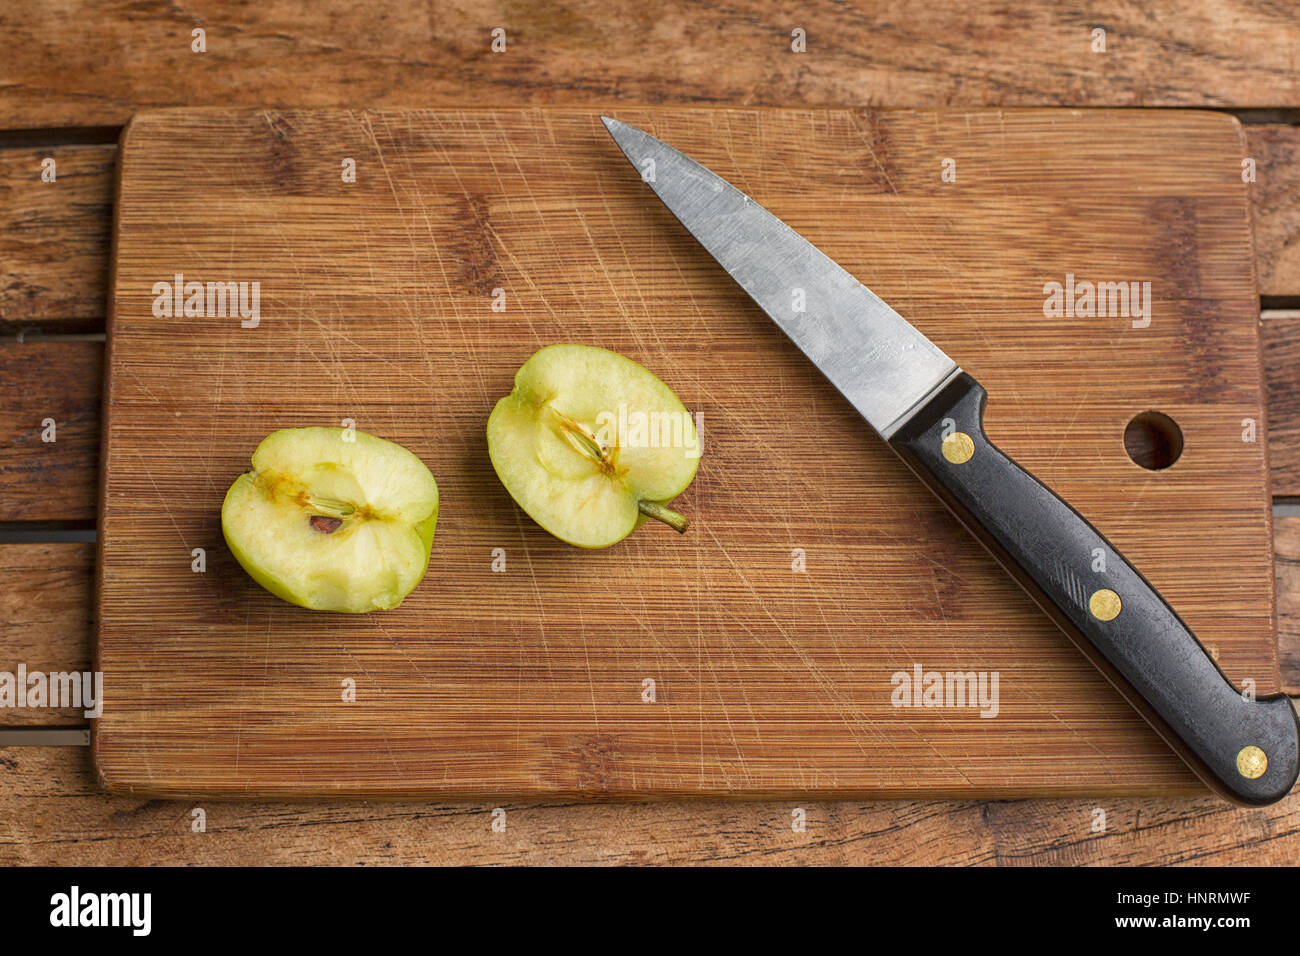 Two halves of an apple and a chef's knife on a wooden cutting board Stock Photo